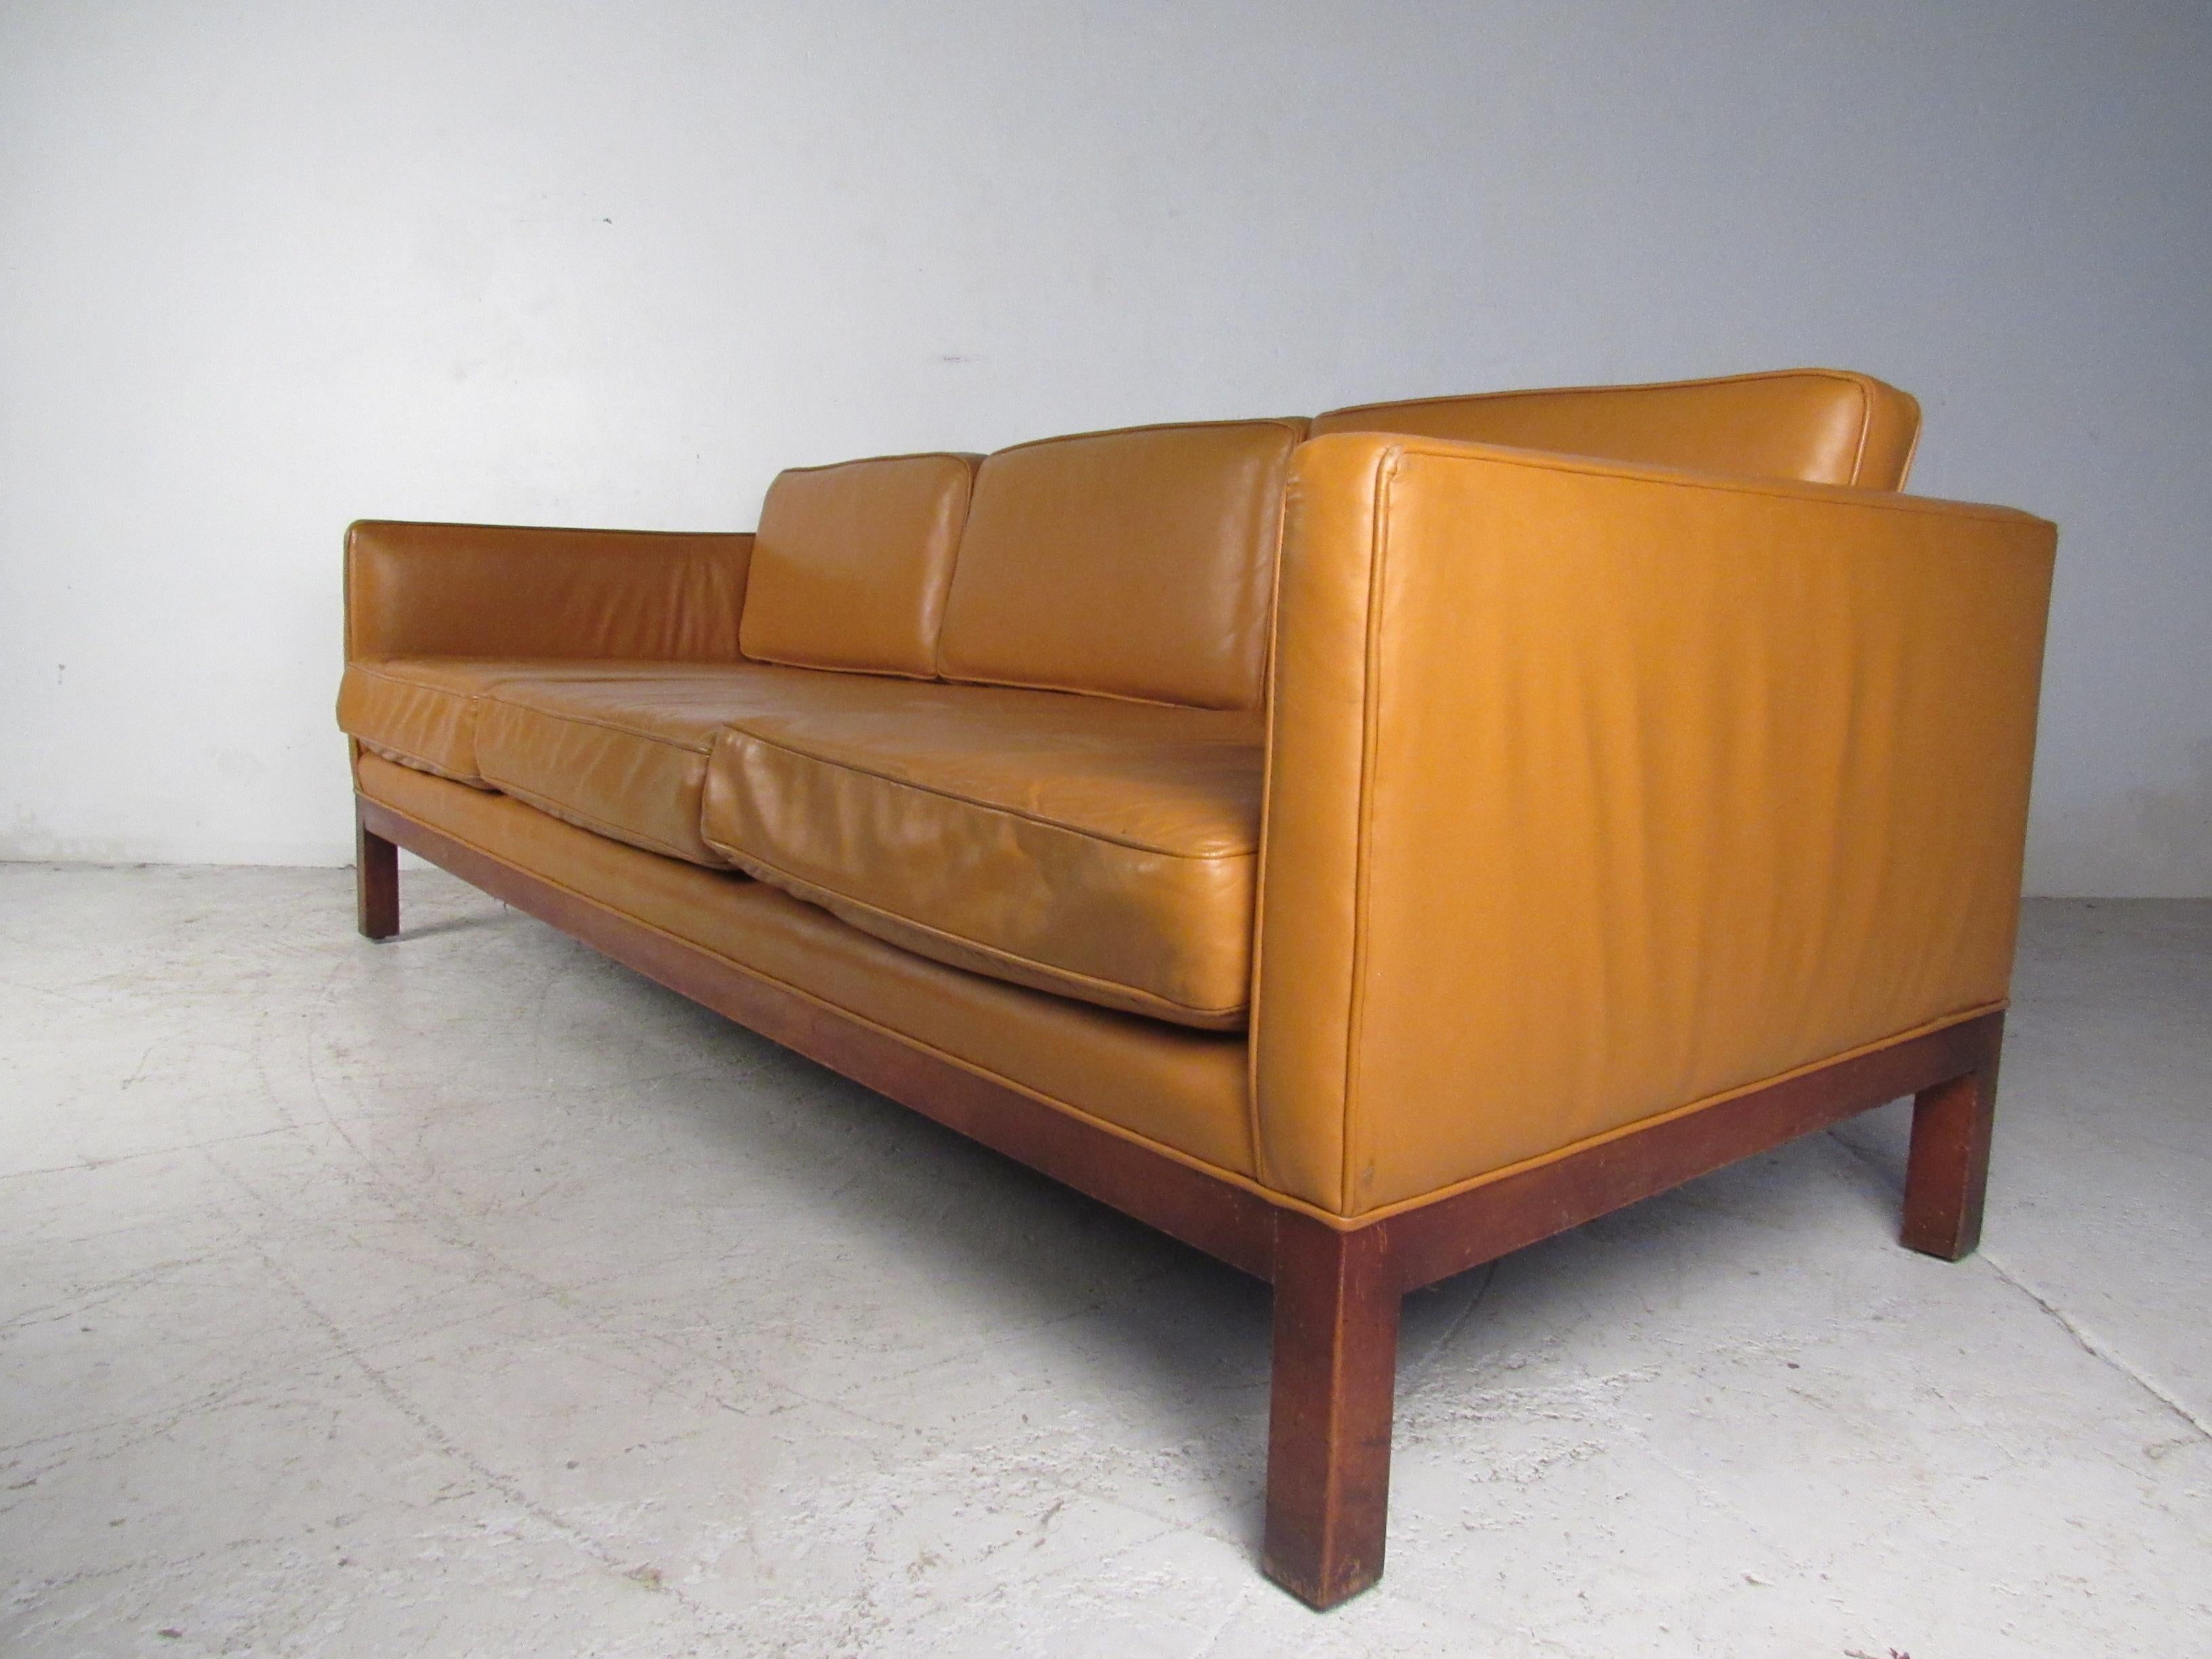 This impressive vintage modern sofa boasts six overstuffed removable cushions ensuring maximum comfort in any seating arrangement. A sleek design covered in tan leather that sits on a sturdy walnut base. This stunning midcentury sofa adds style and